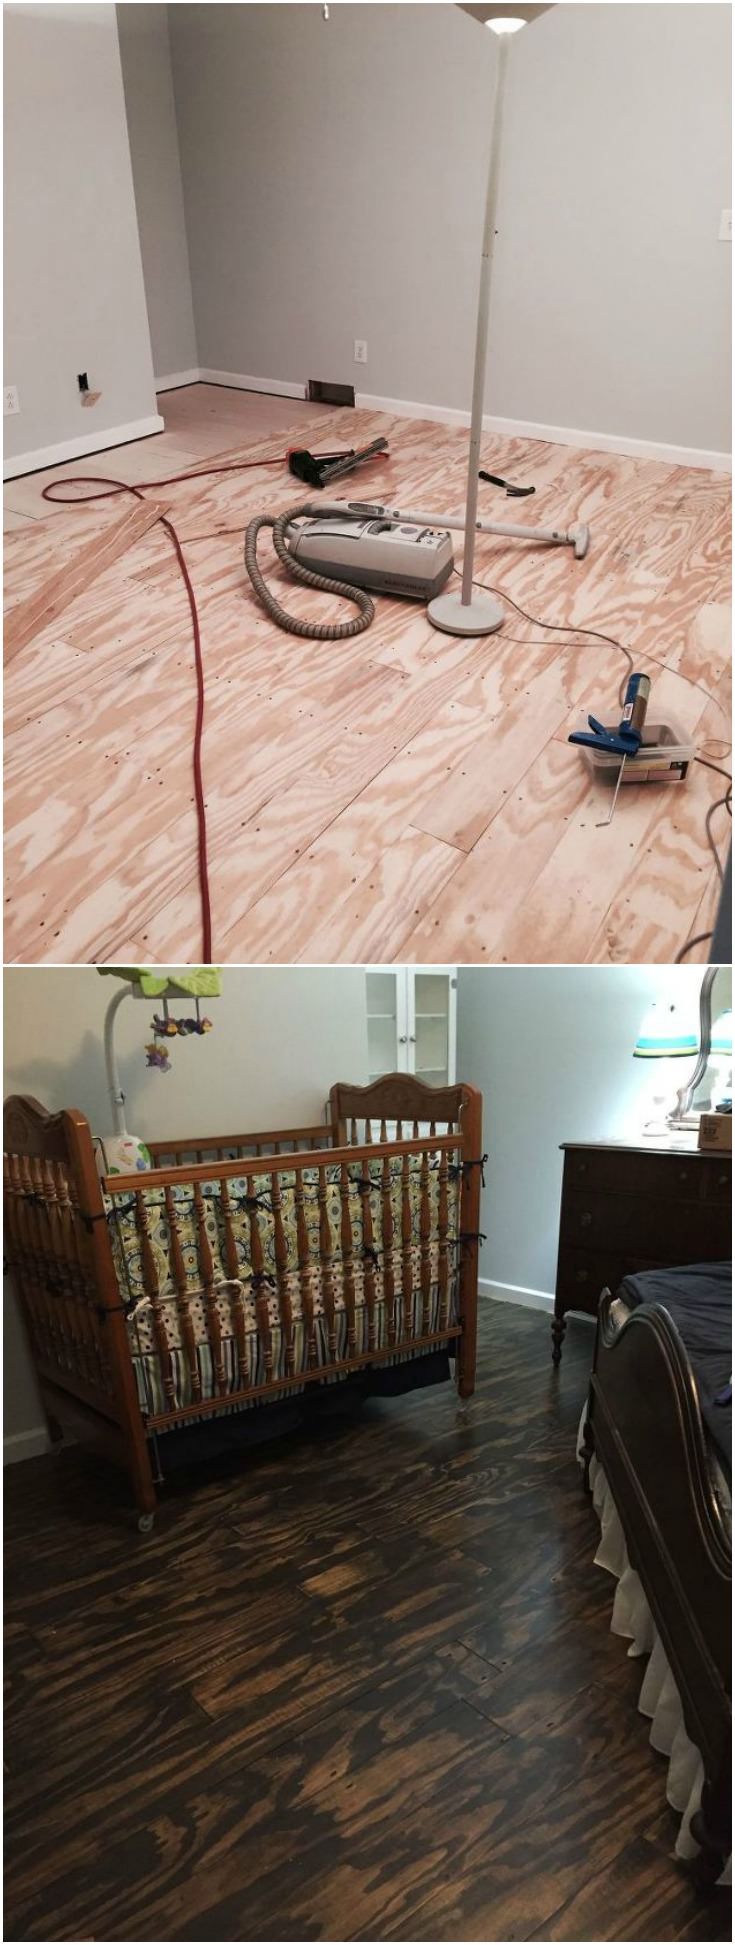 DIY Plywood Plank Floors! Trust me, it's easier than you may think! We did t...